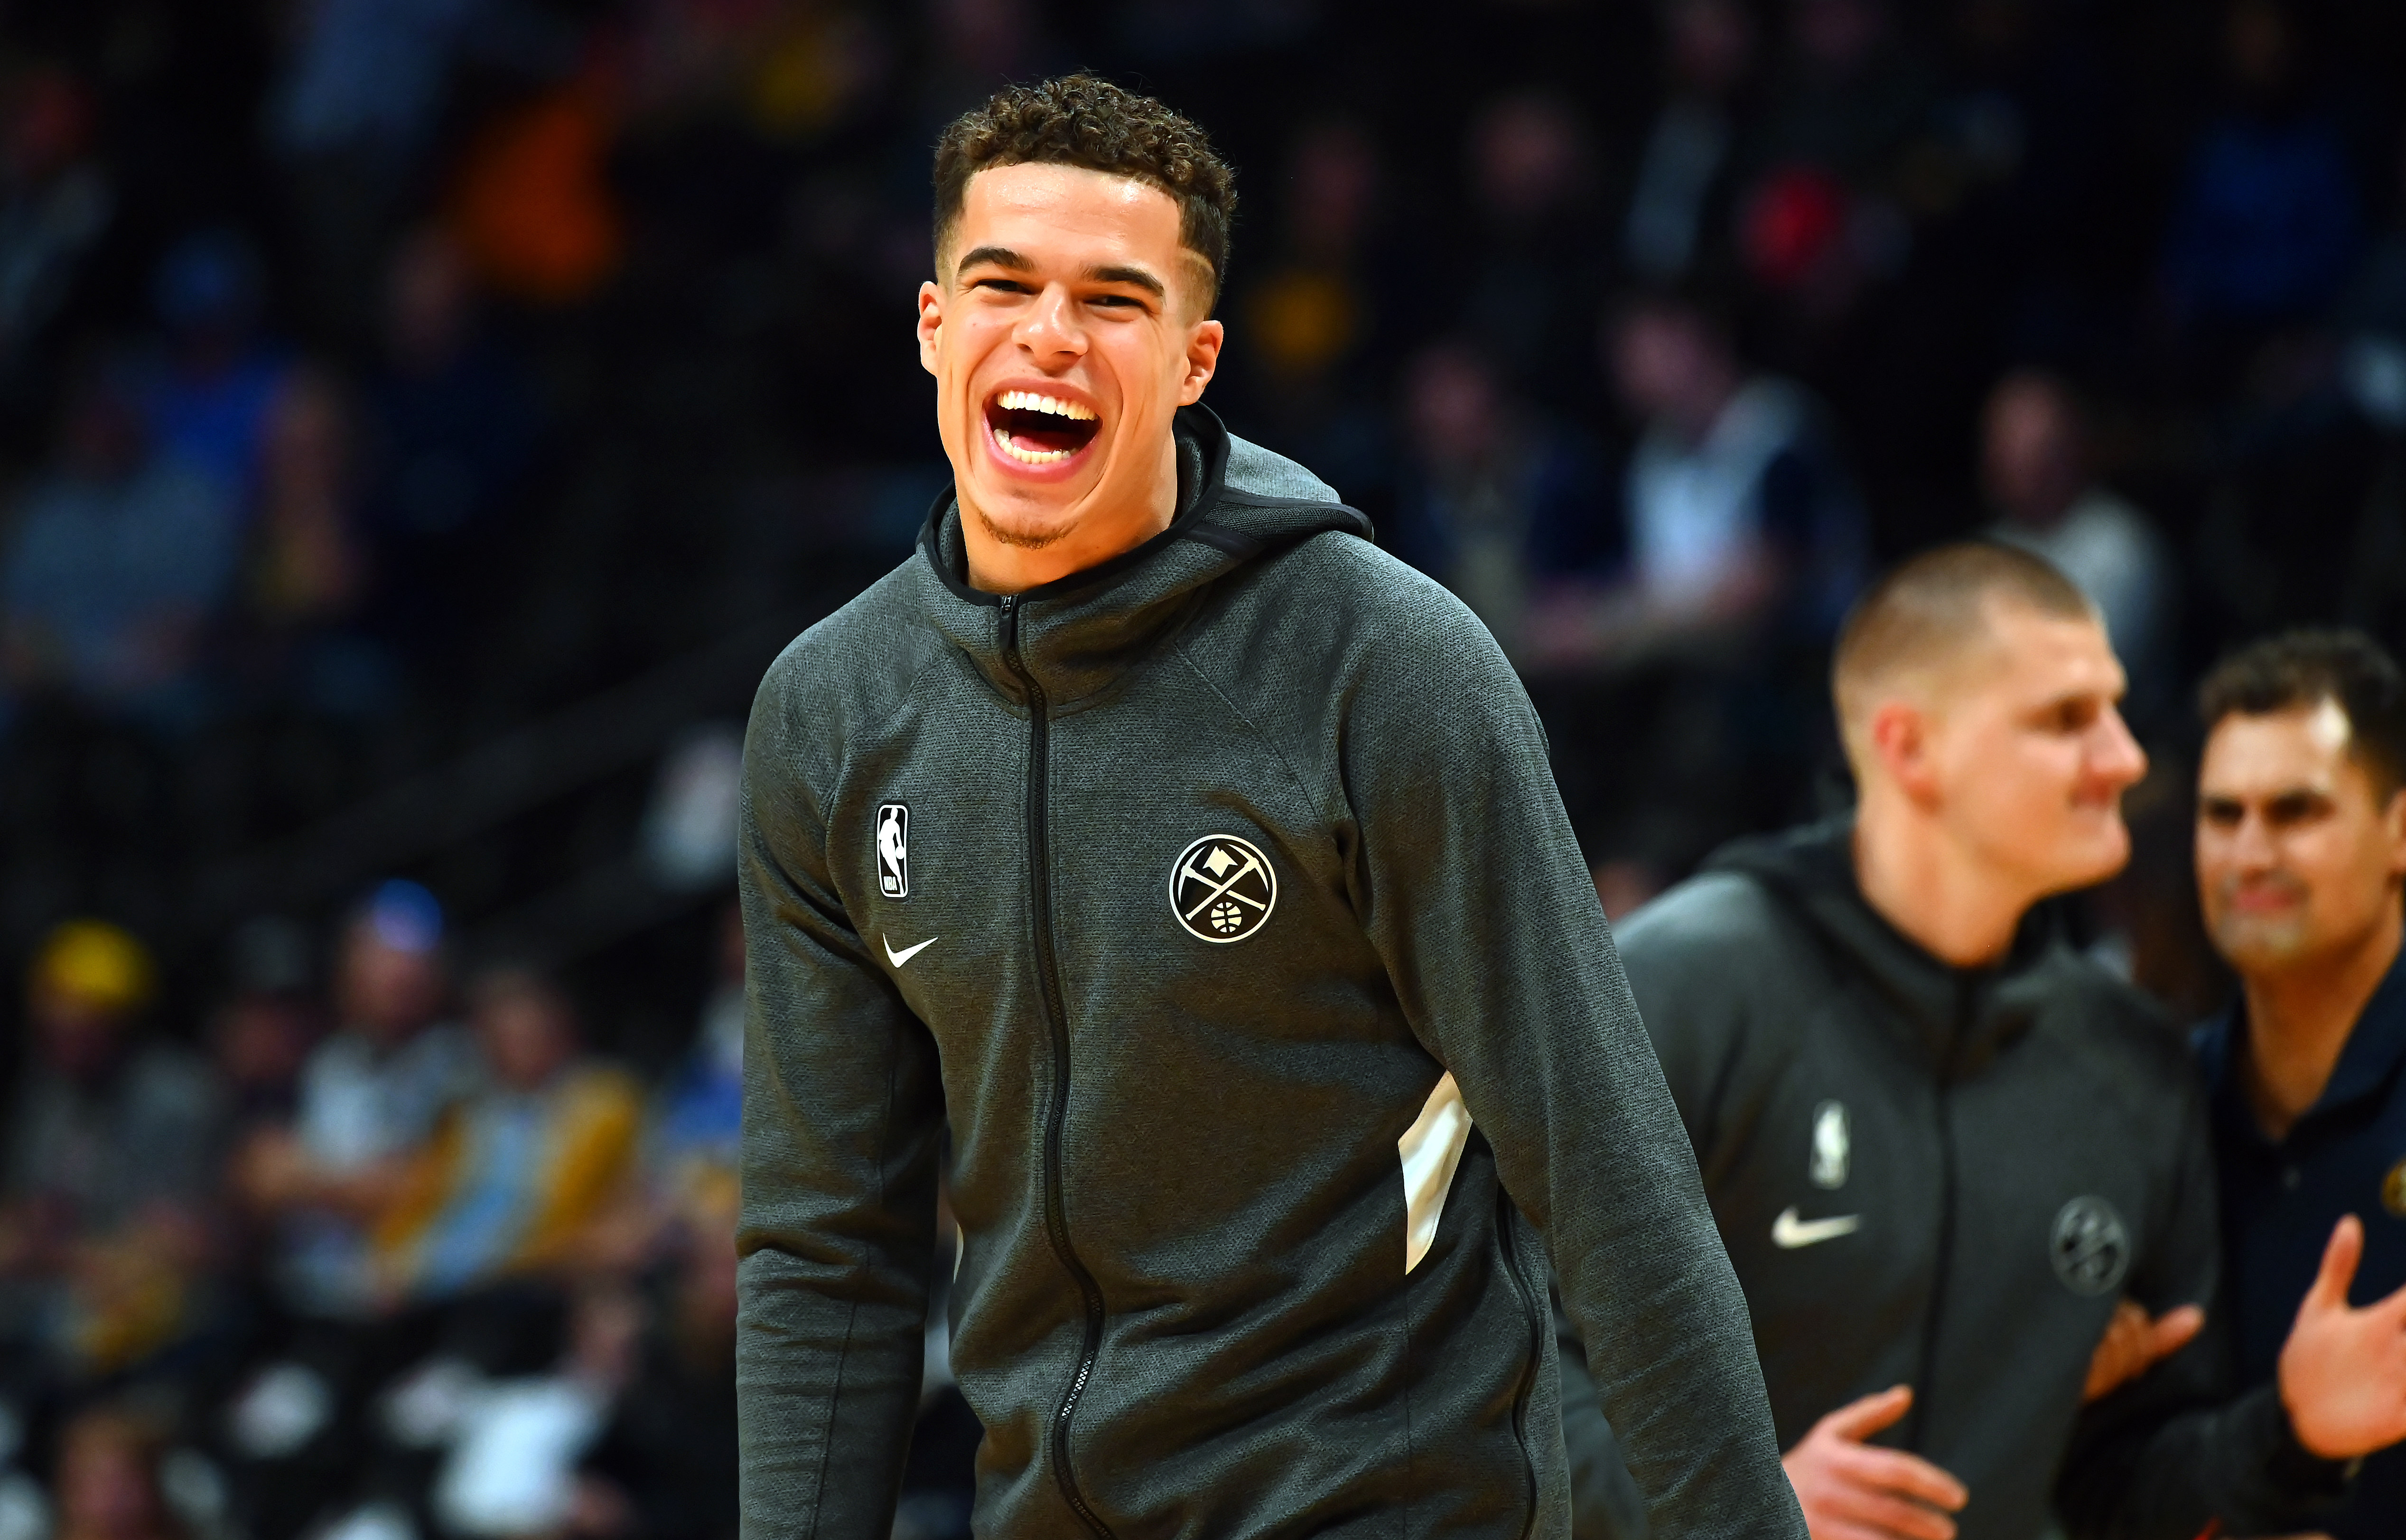 Denver Nuggets forward Michael Porter Jr. (1) before the game against the Miami Heat at the Pepsi Center.